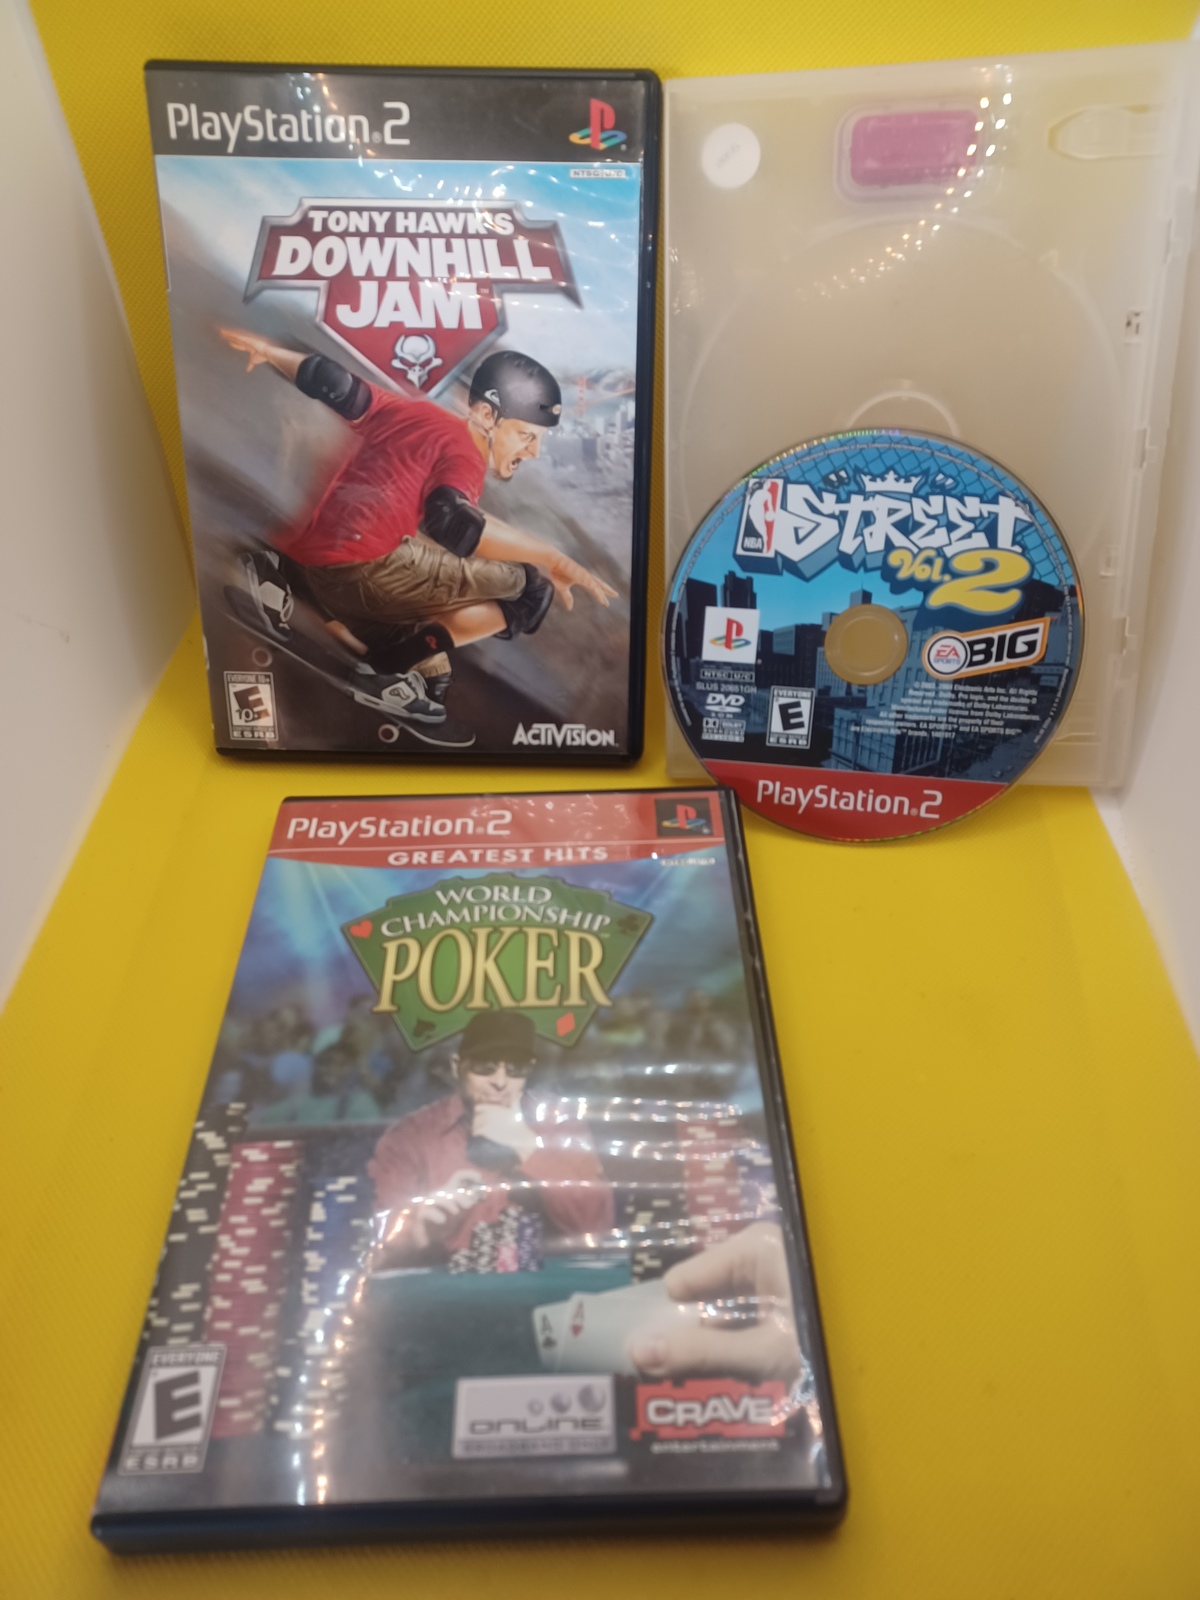 Primary image for Downhill Jam, Street Vol. 2 & Poker - 3 Preowned ps2 Games 